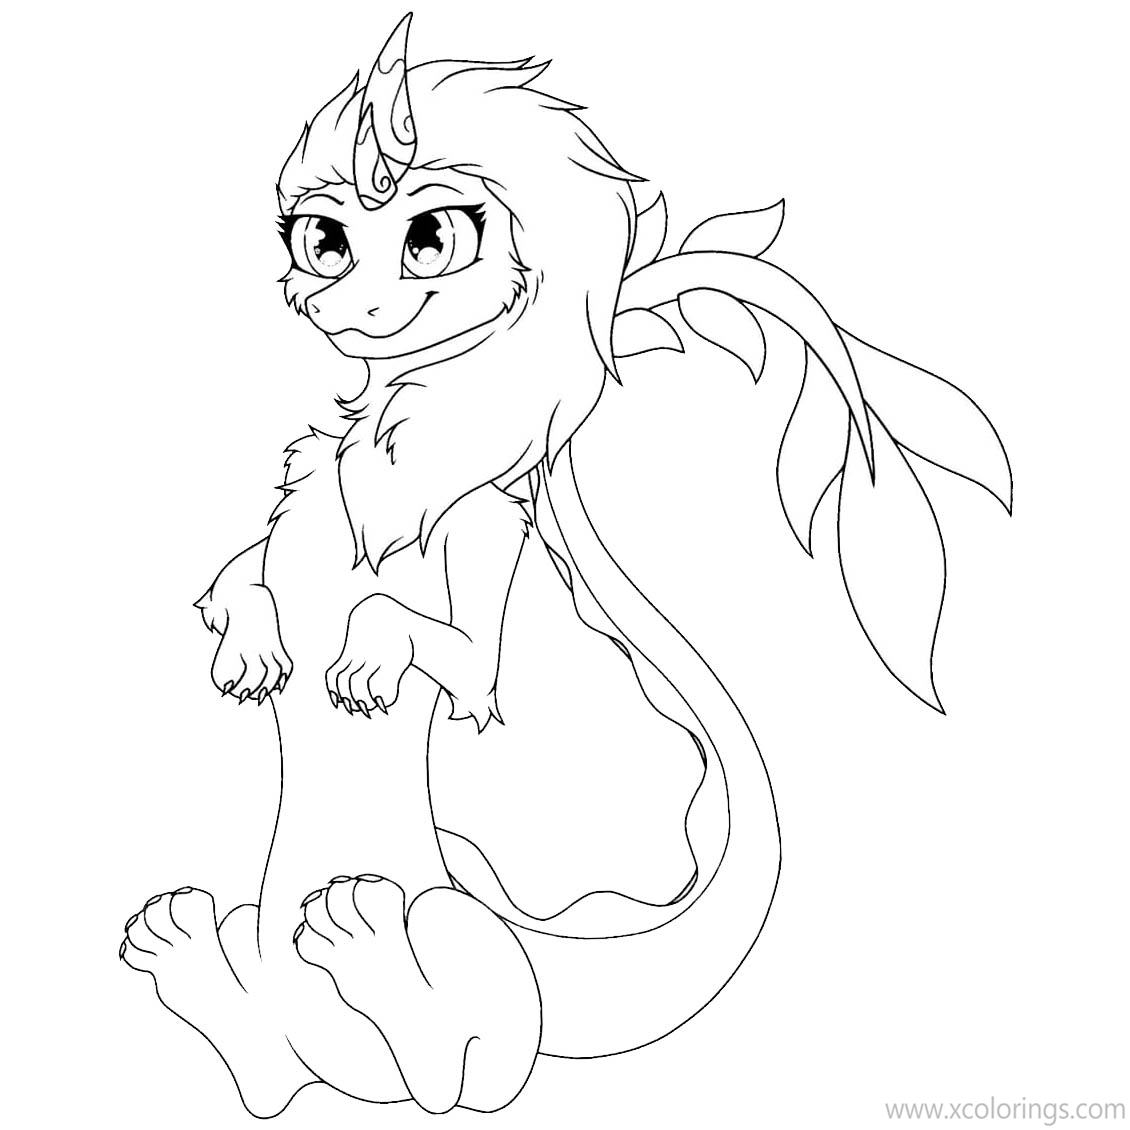 Disney Film Raya And The Last Dragon Coloring Pages